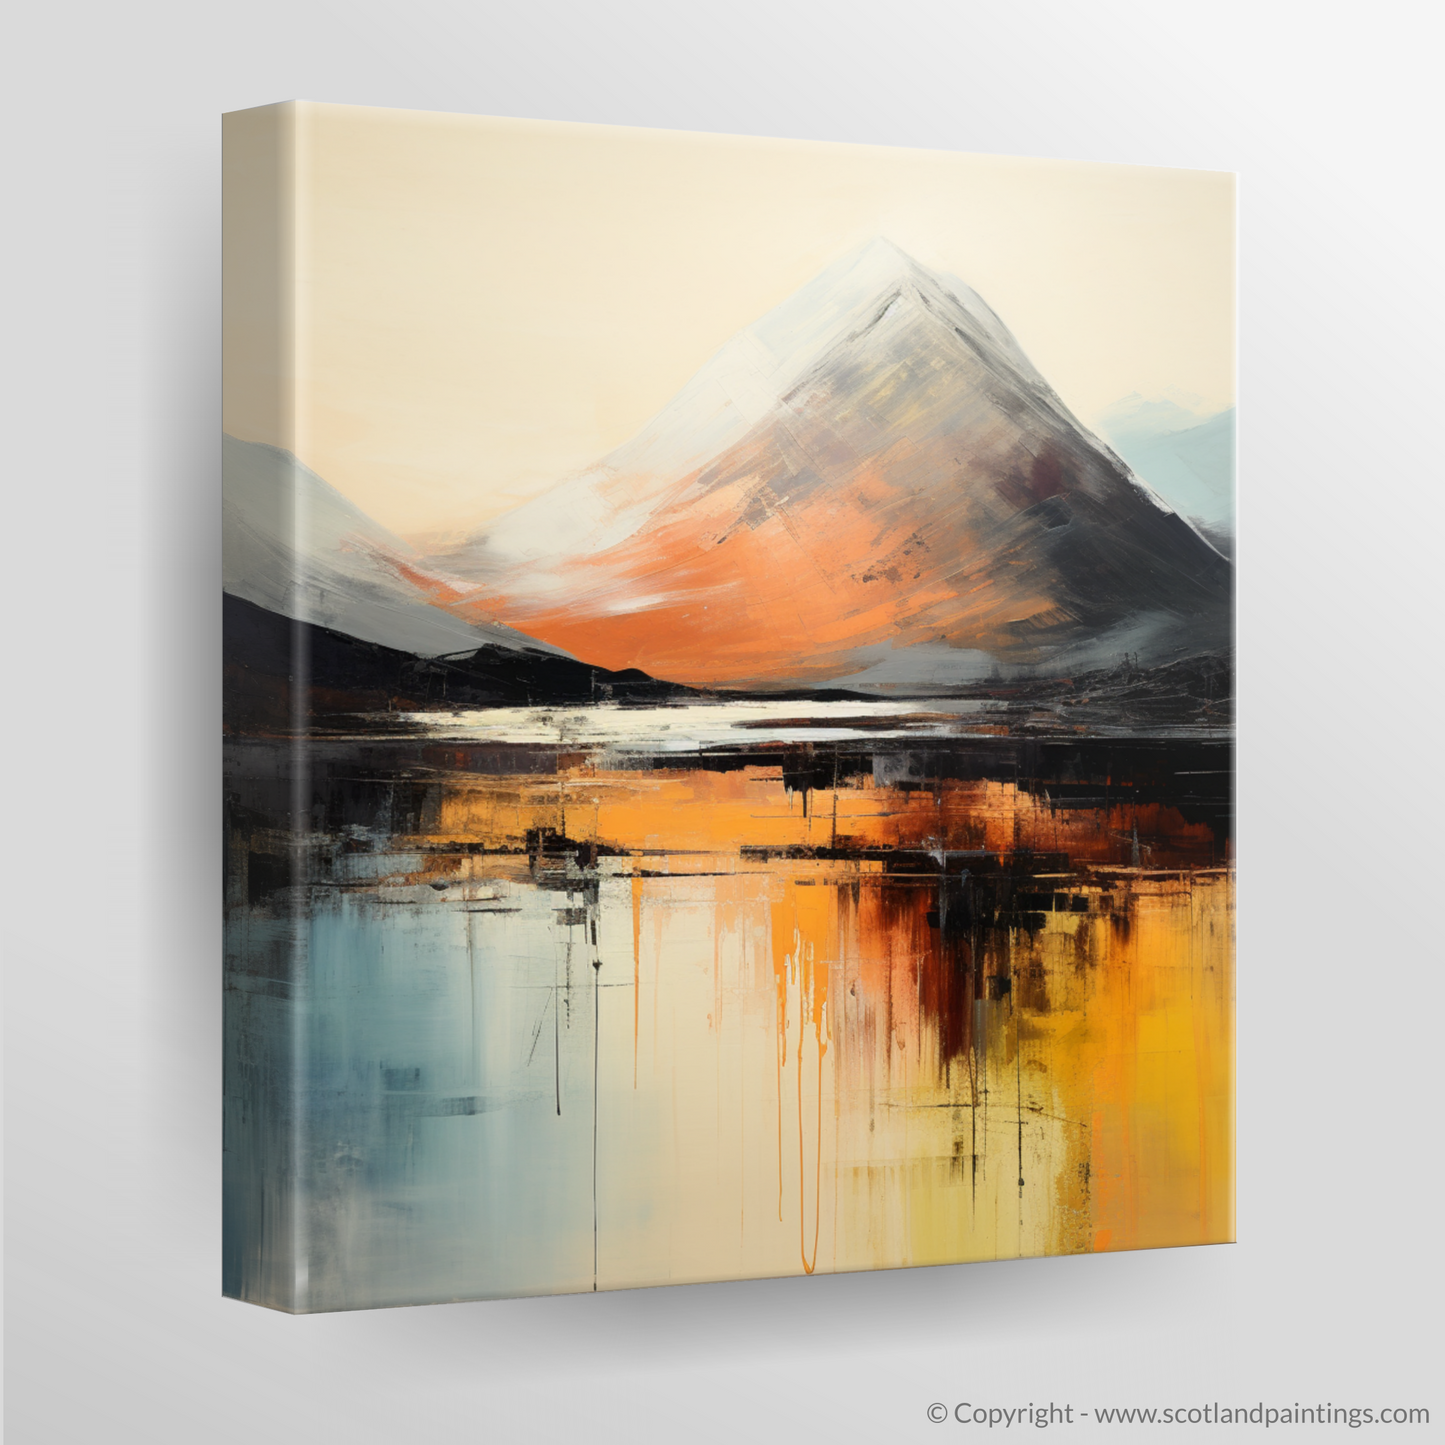 Highland Mirage: An Abstract Reflection of Buachaille Etive Mòr